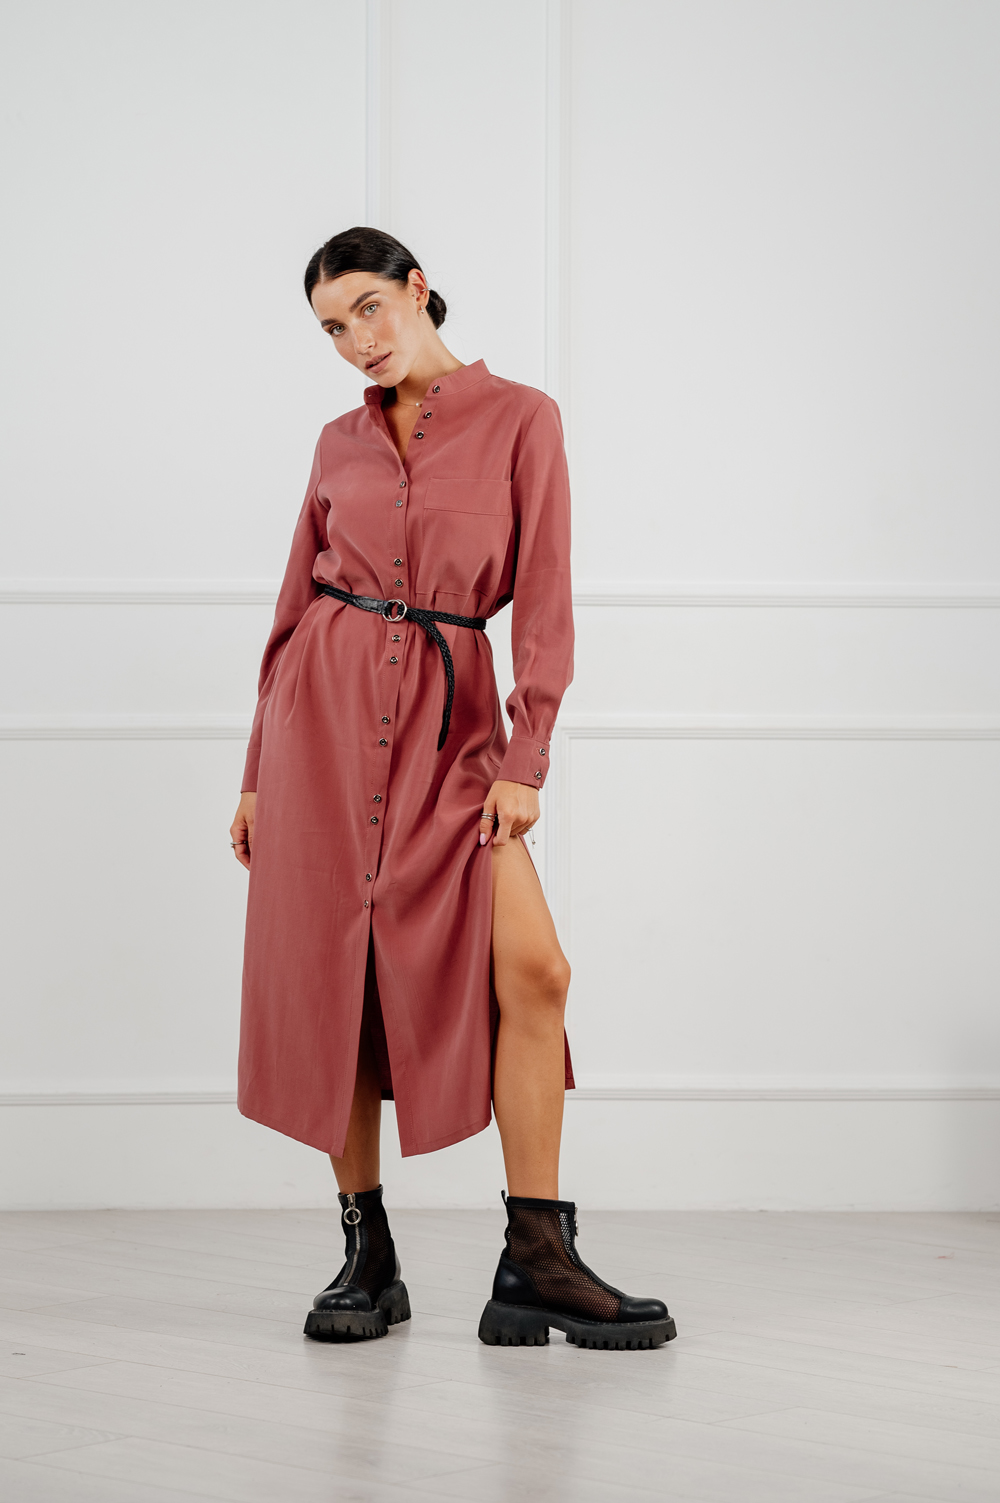 Midi dress in a shade of 